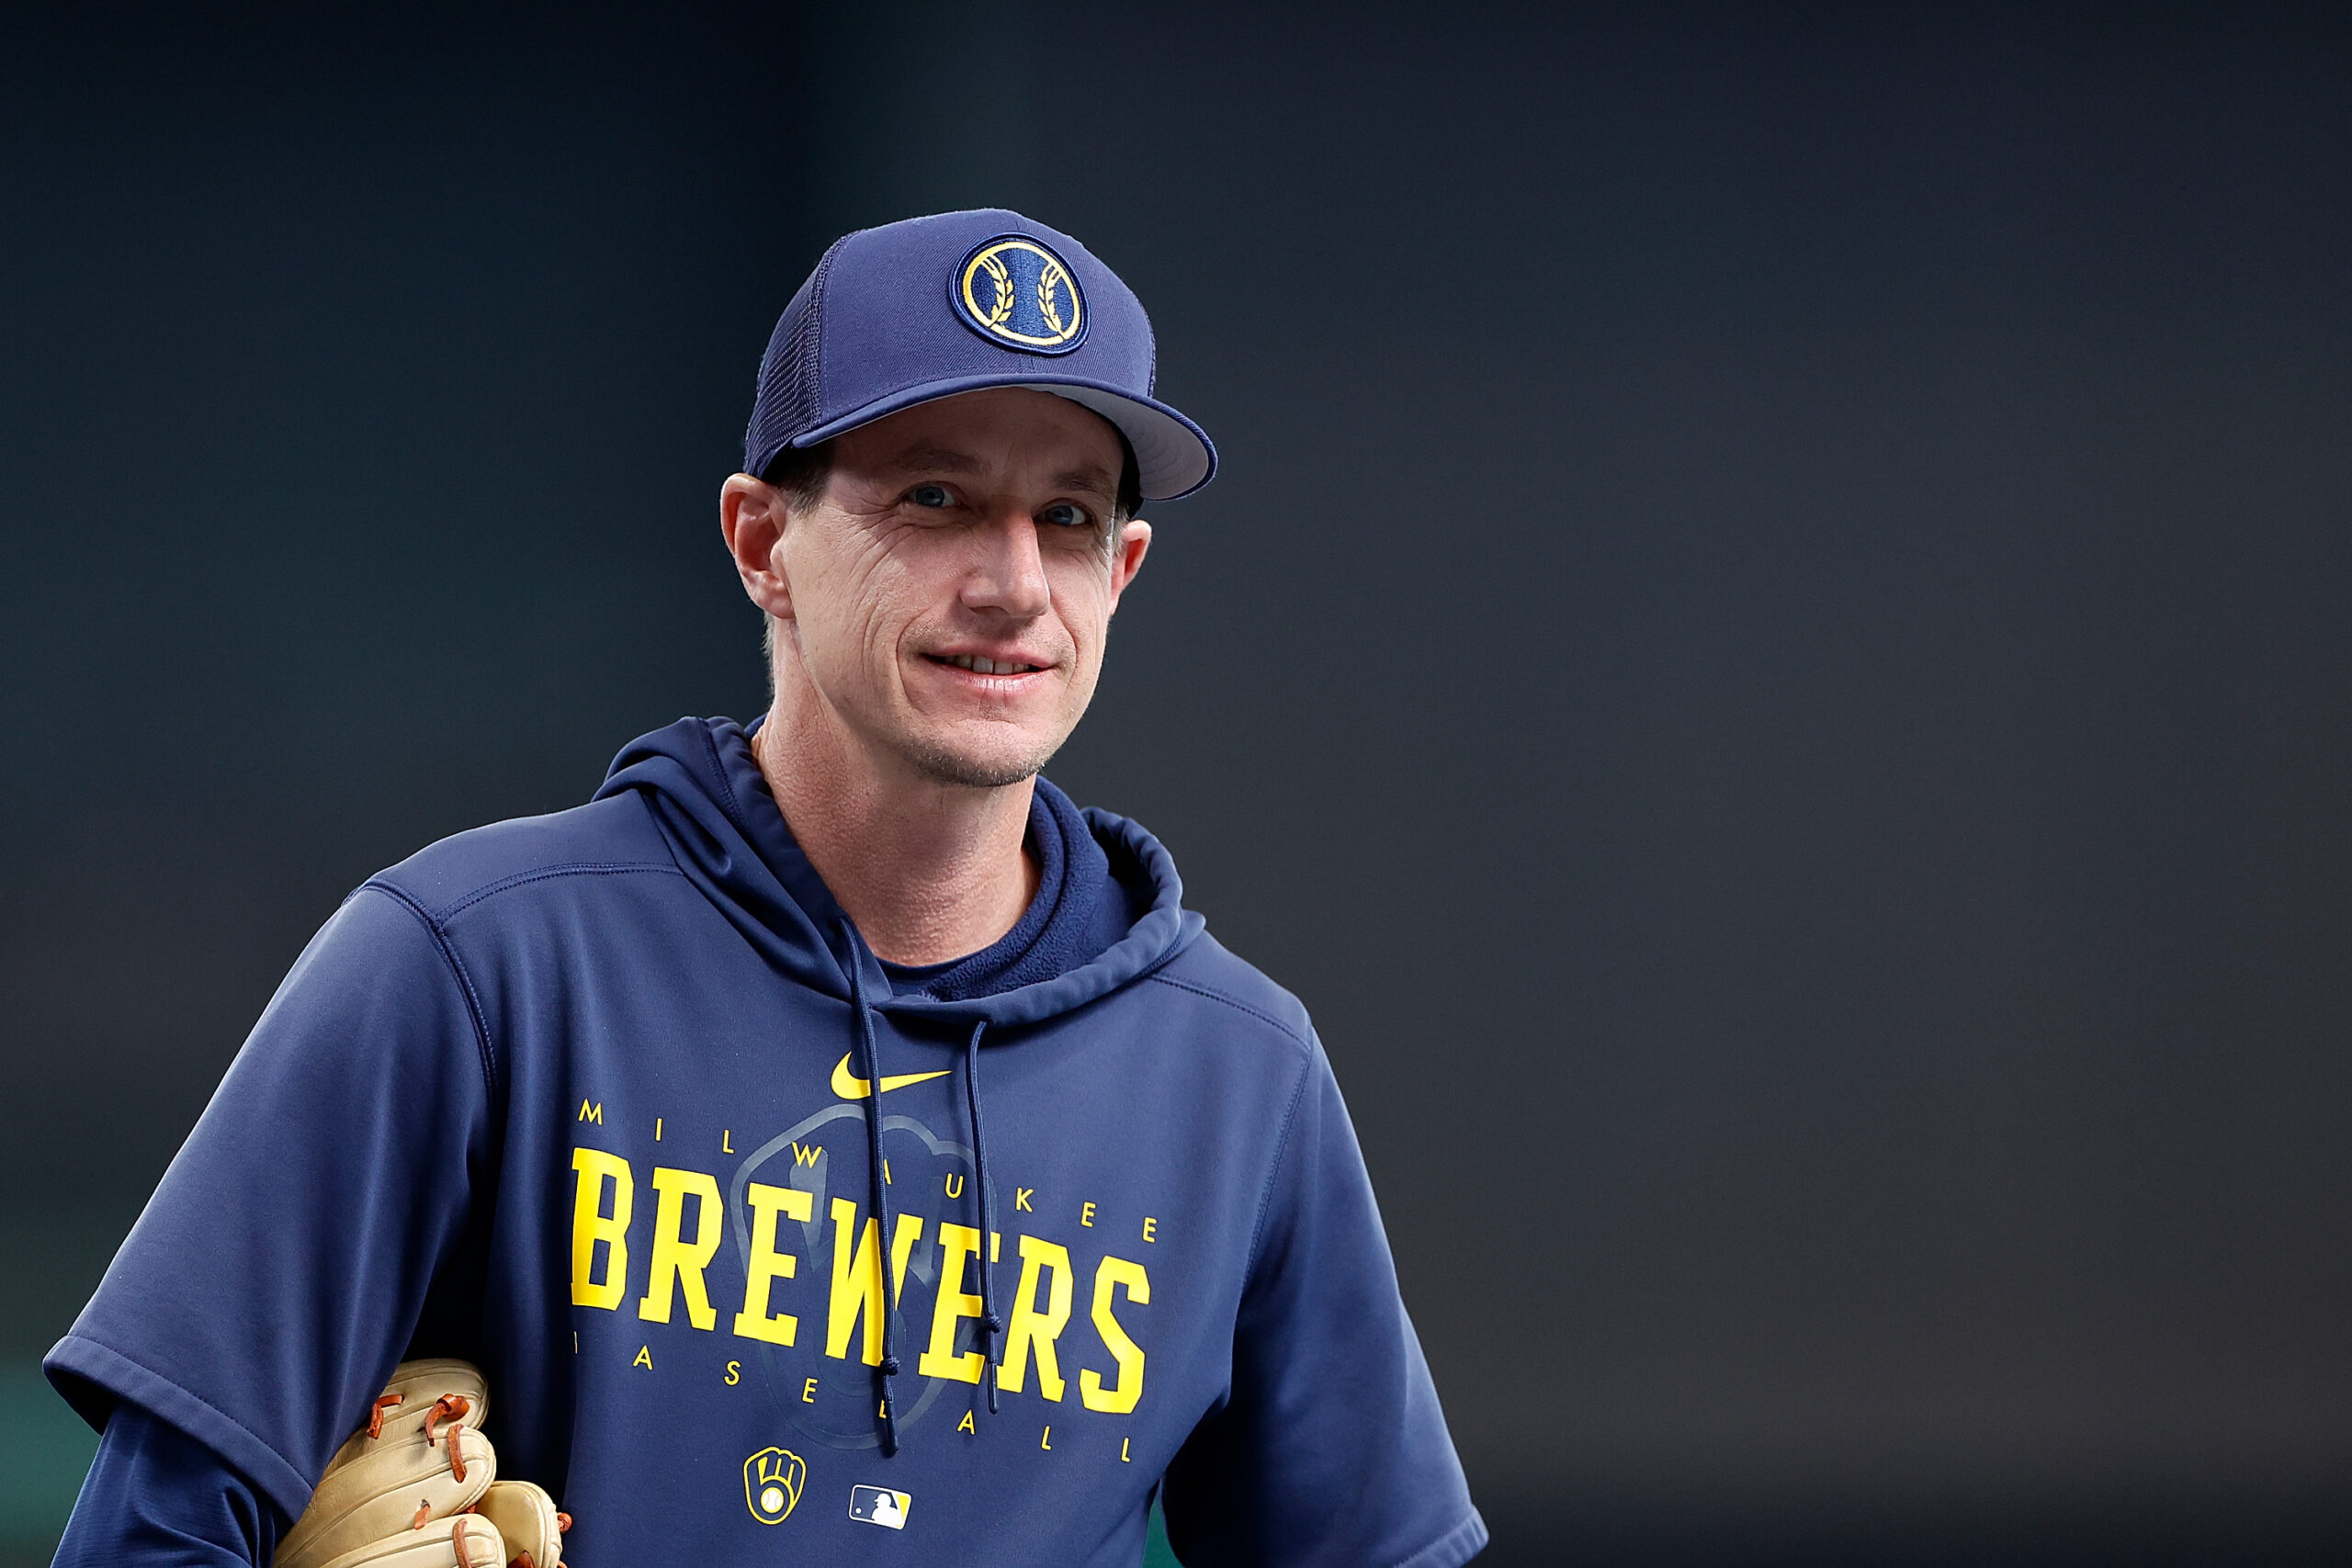 Brewers manager Craig Counsell's sons star for Whitefish Bay baseball